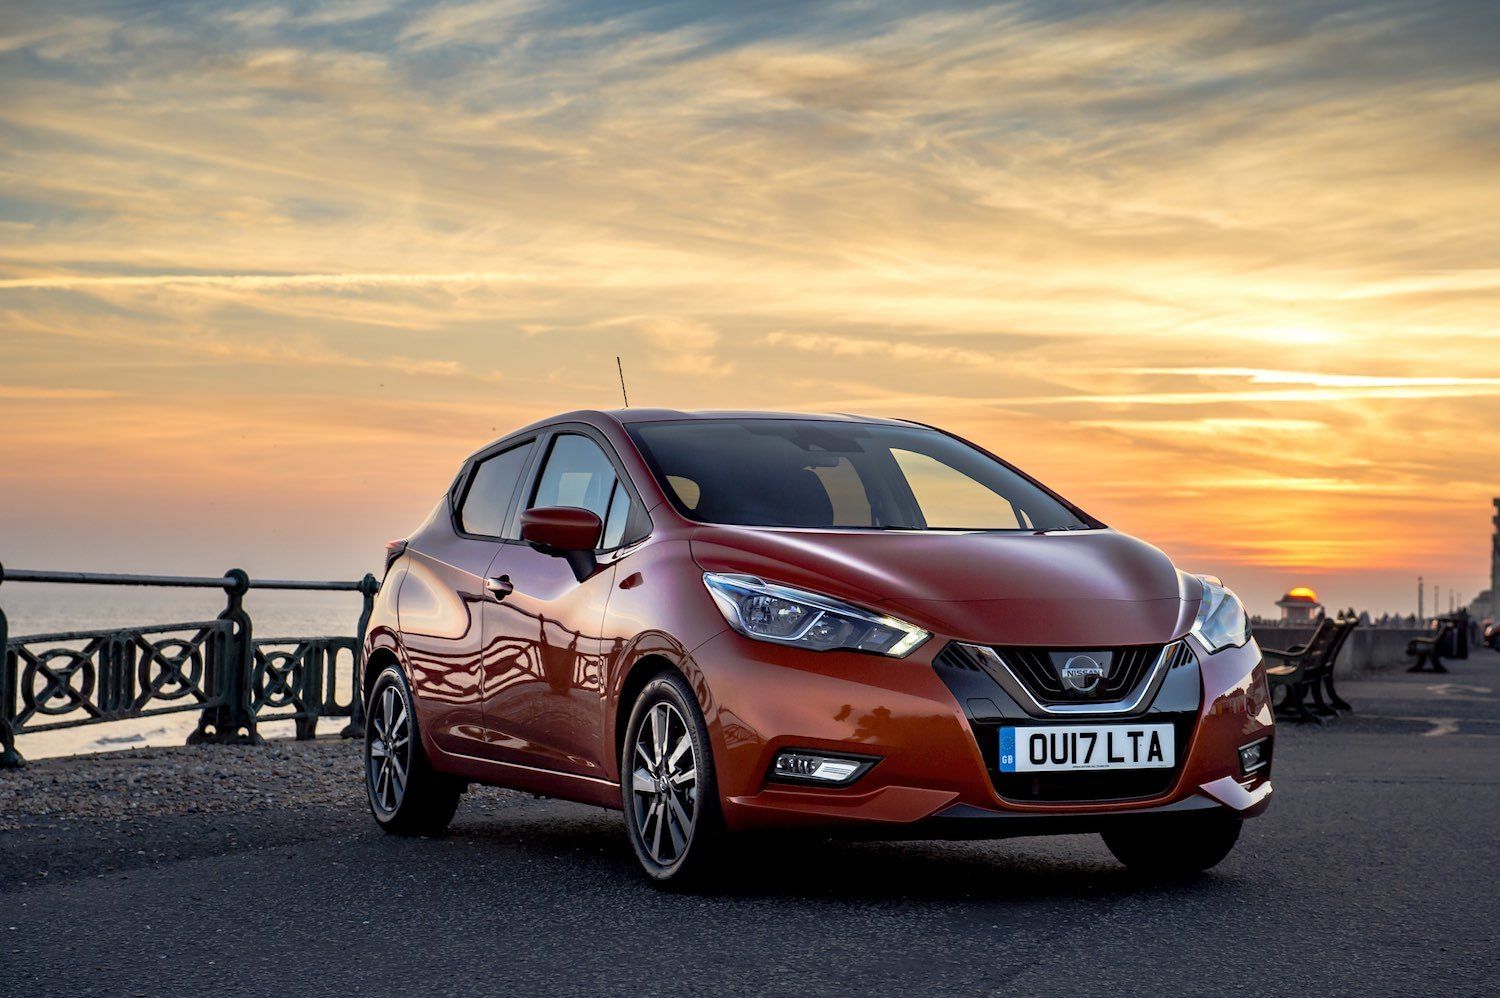 Tom Scanlan drives the All New Nissan Micra 12